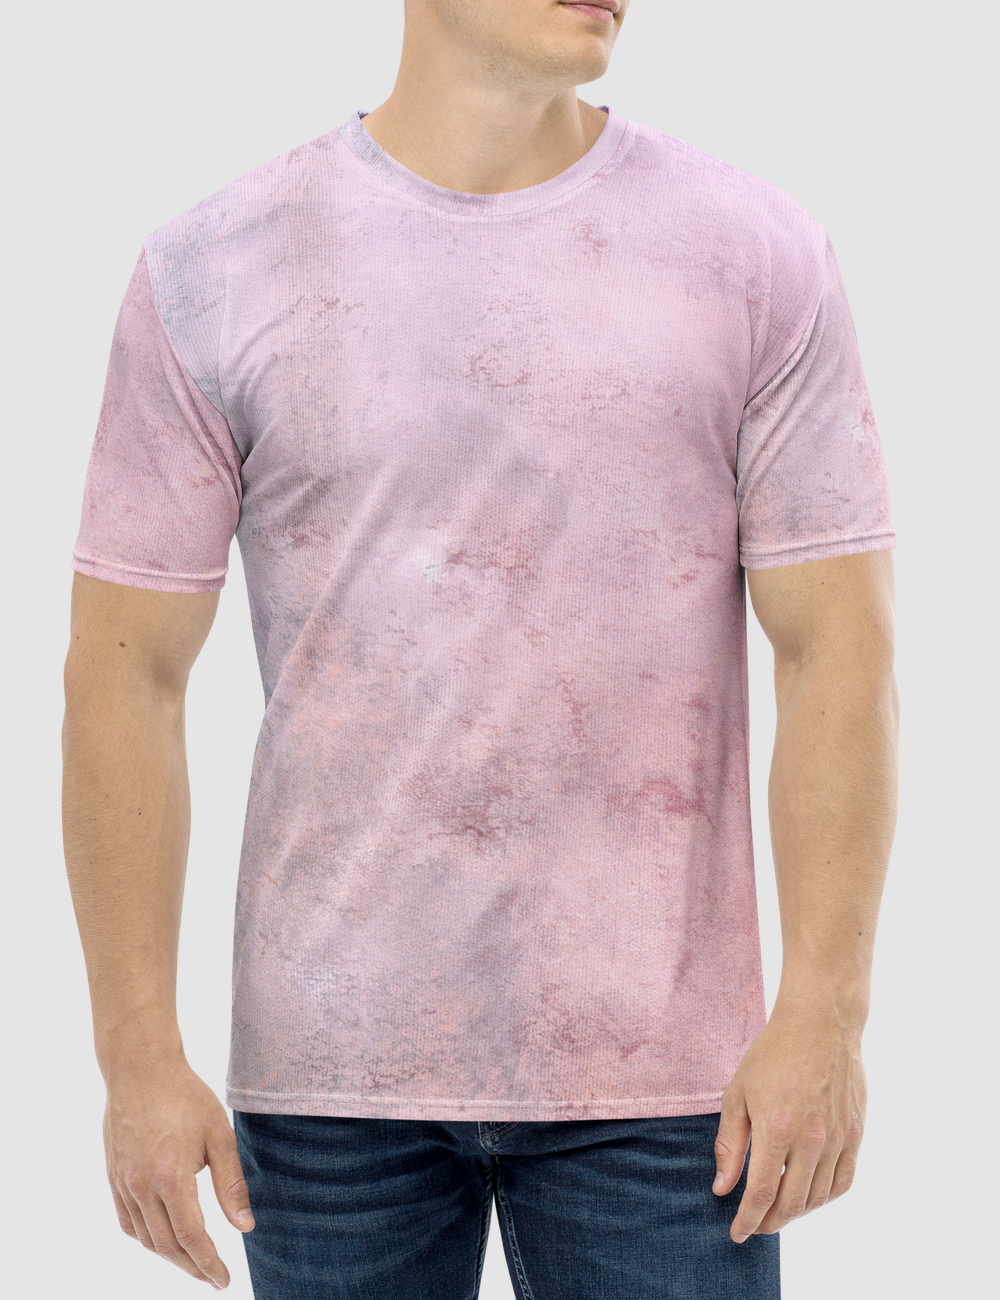 Painted Concrete Abstract | Men's Sublimated T-Shirt OniTakai